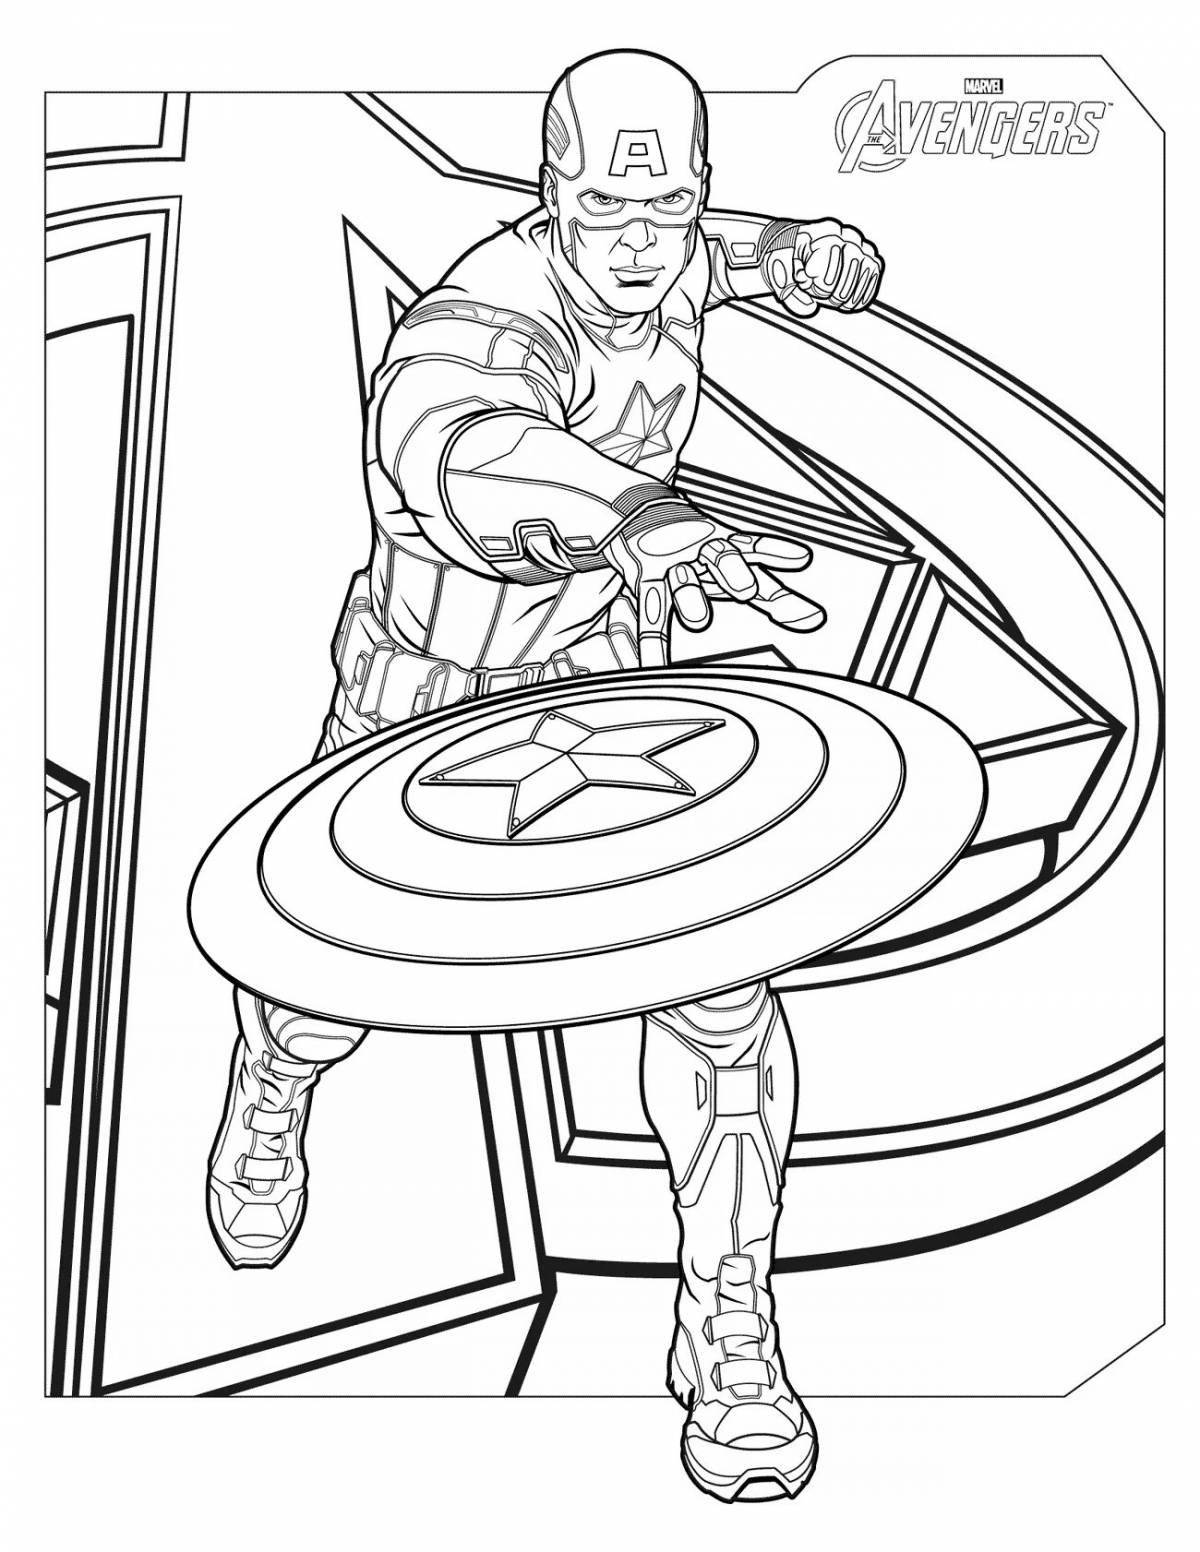 Captain America coloring pages for kids